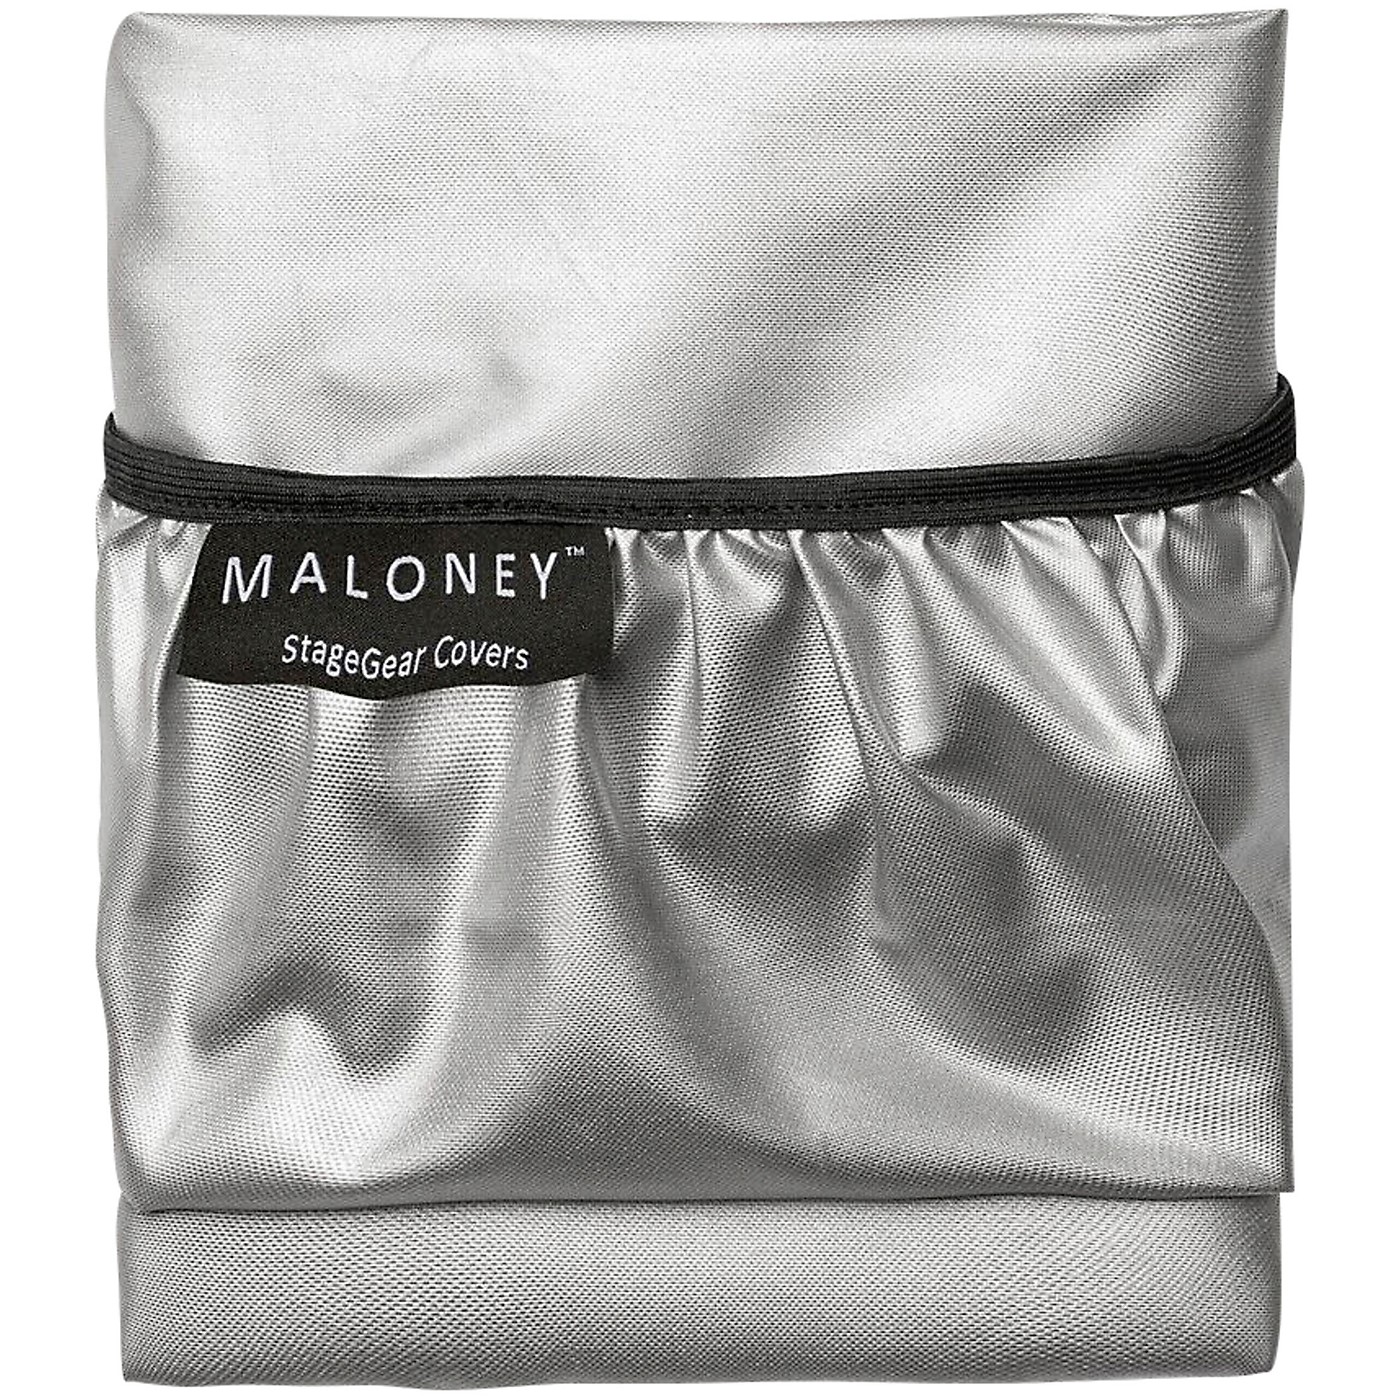 MALONEY StageGear Covers Reversible Black And Silver Keyboard Cover thumbnail